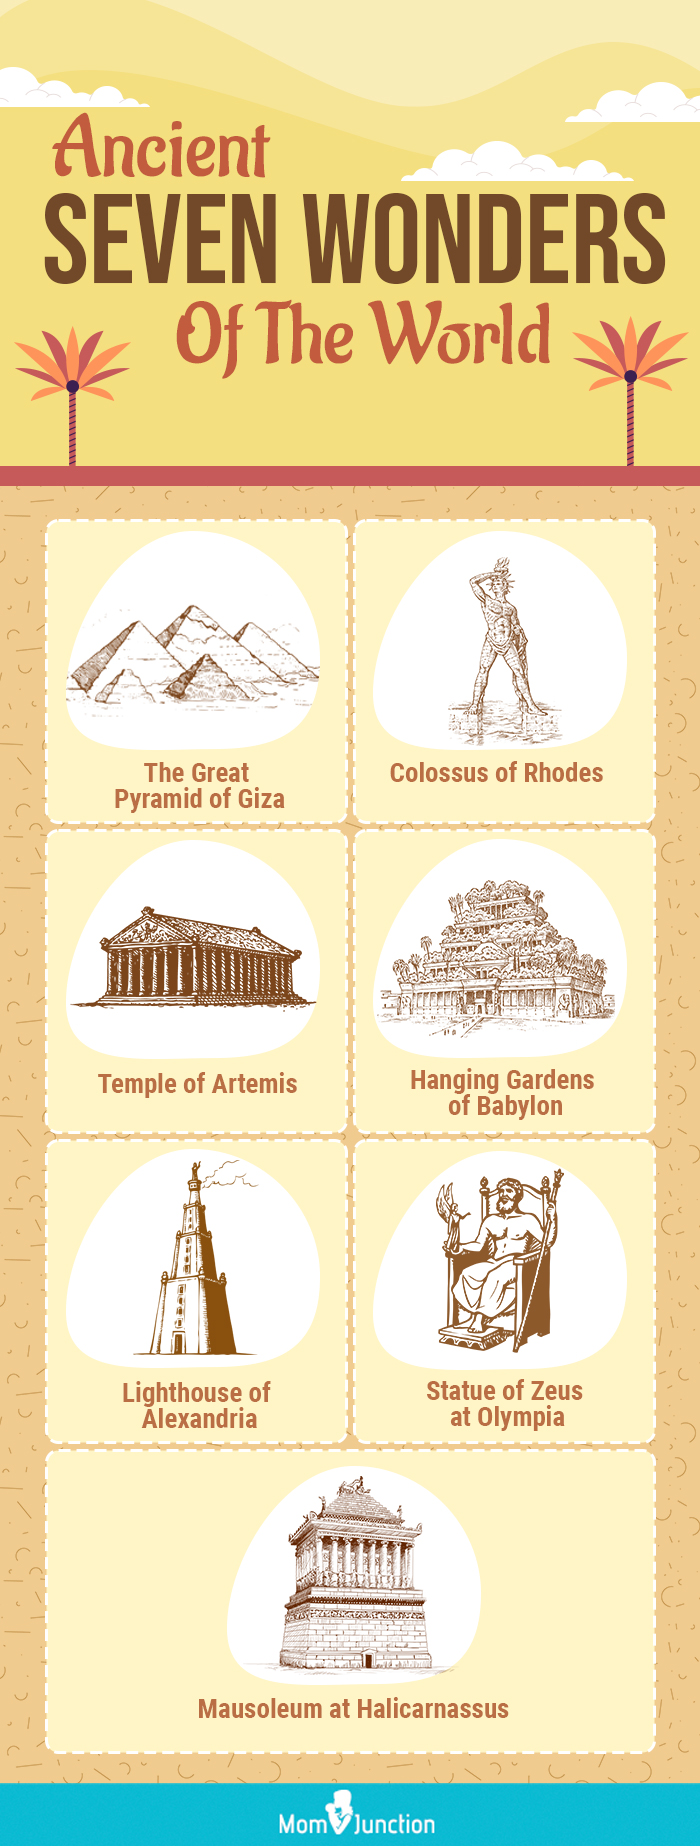 ancient seven wonders of the world [infographic]